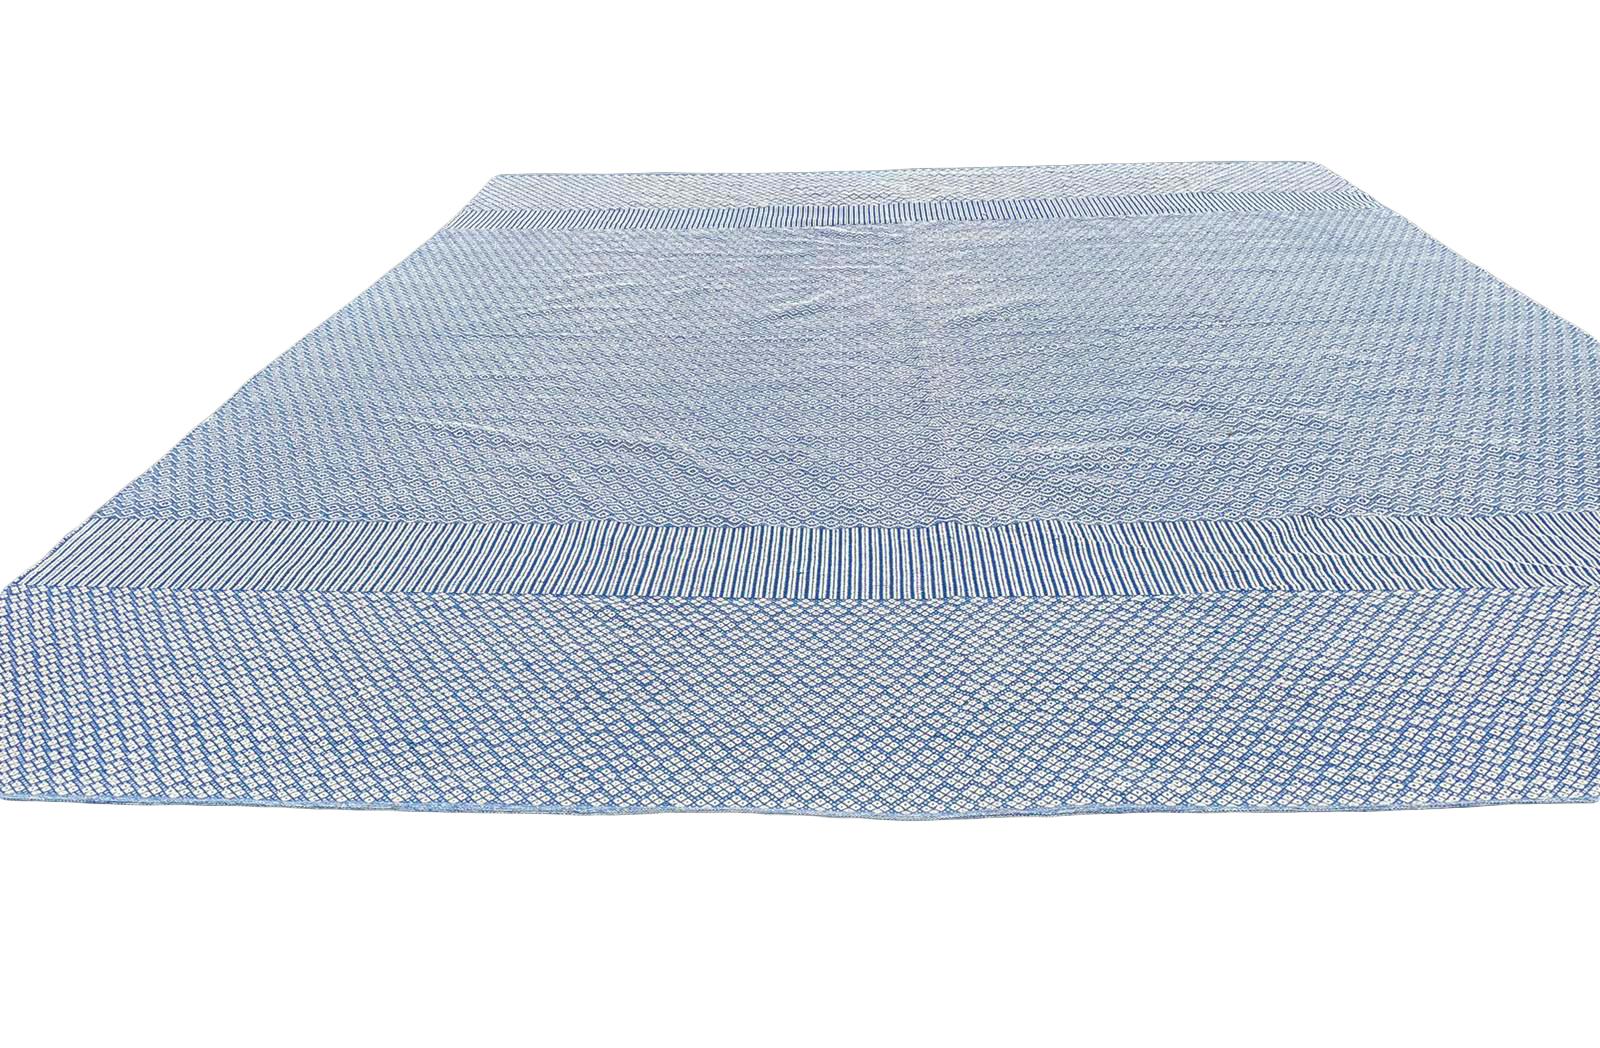 Oversized Blue and White Flat-Weave Indian Kilim by Gordian Rugs 6